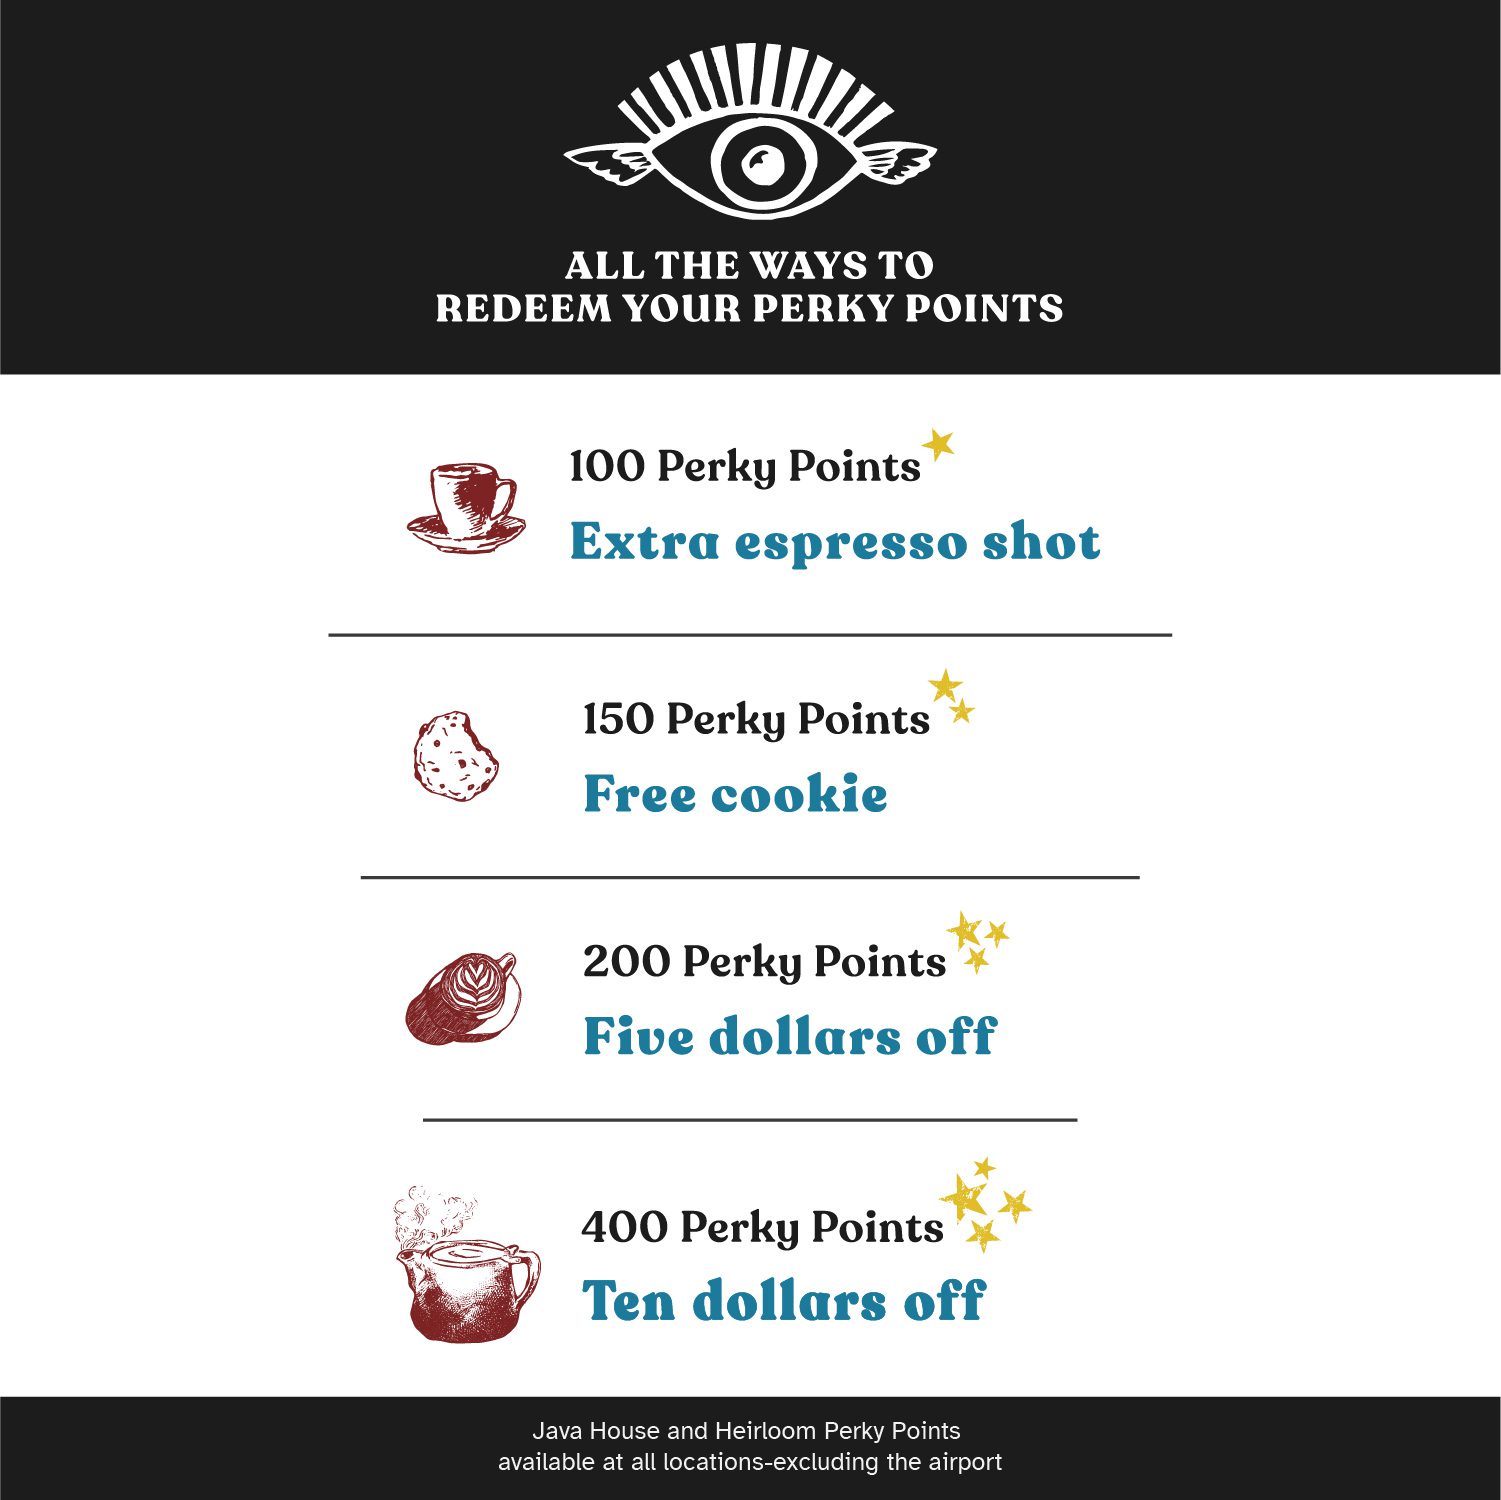 Perky Points Loyalty Rewards Program with Points earning free money additional espresso shots and merchandise excluding airport